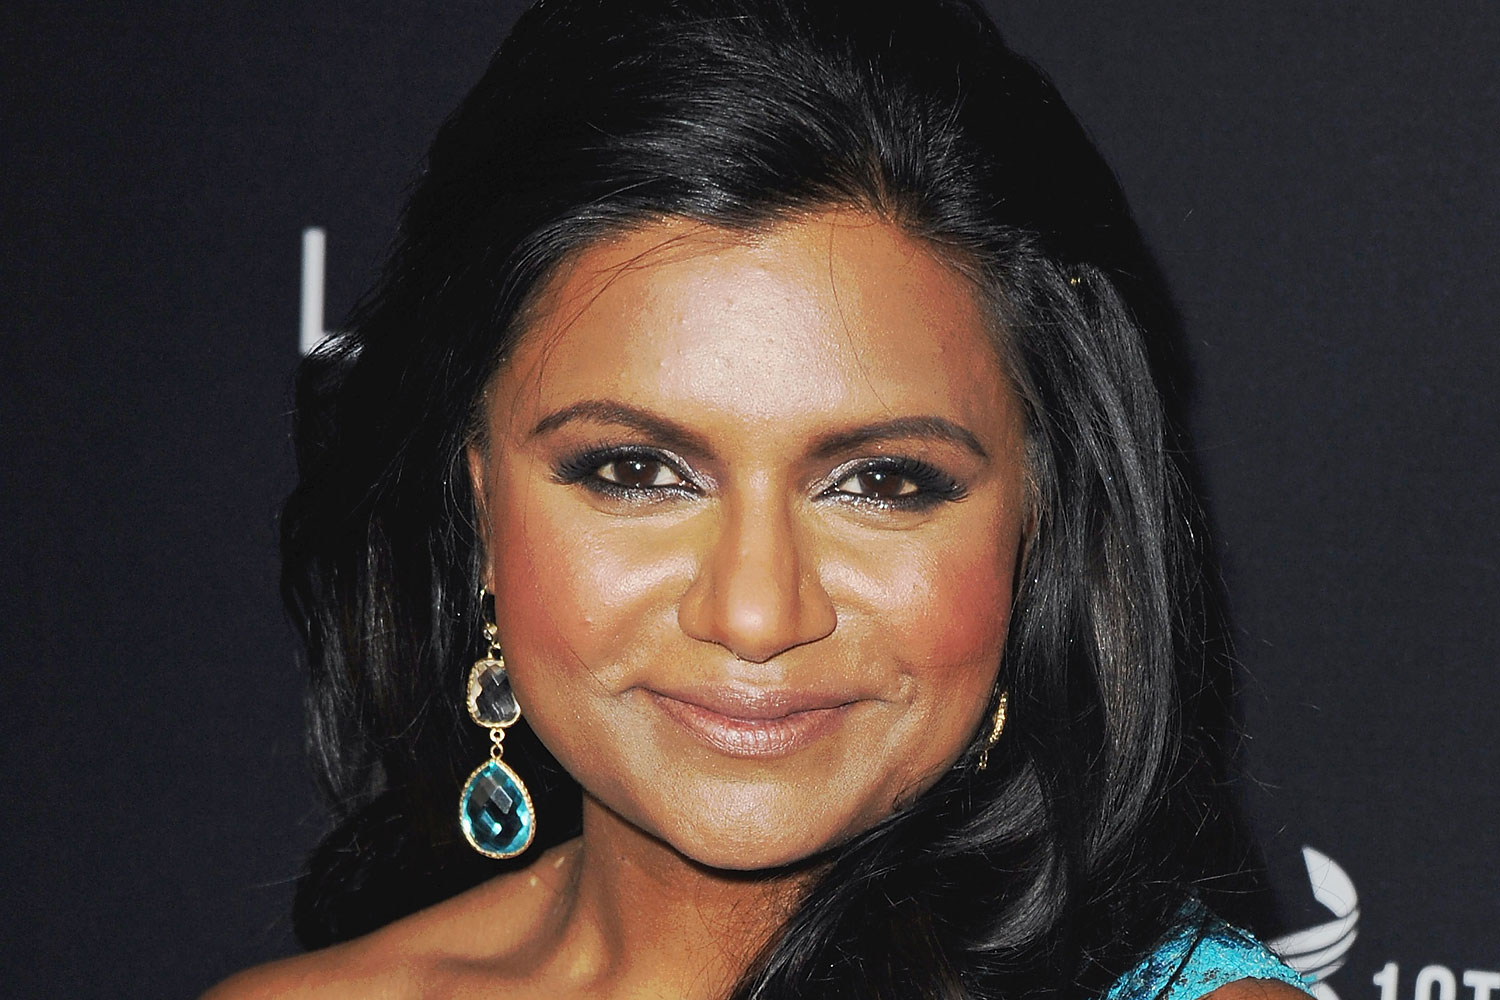 Mindy Kaling at the 16th Costume Designers Guild Awards at The Beverly Hilton Hotel on Feb. 22, 2014 in Beverly Hills. (Jon Kopaloff—FilmMagic/Getty Images)